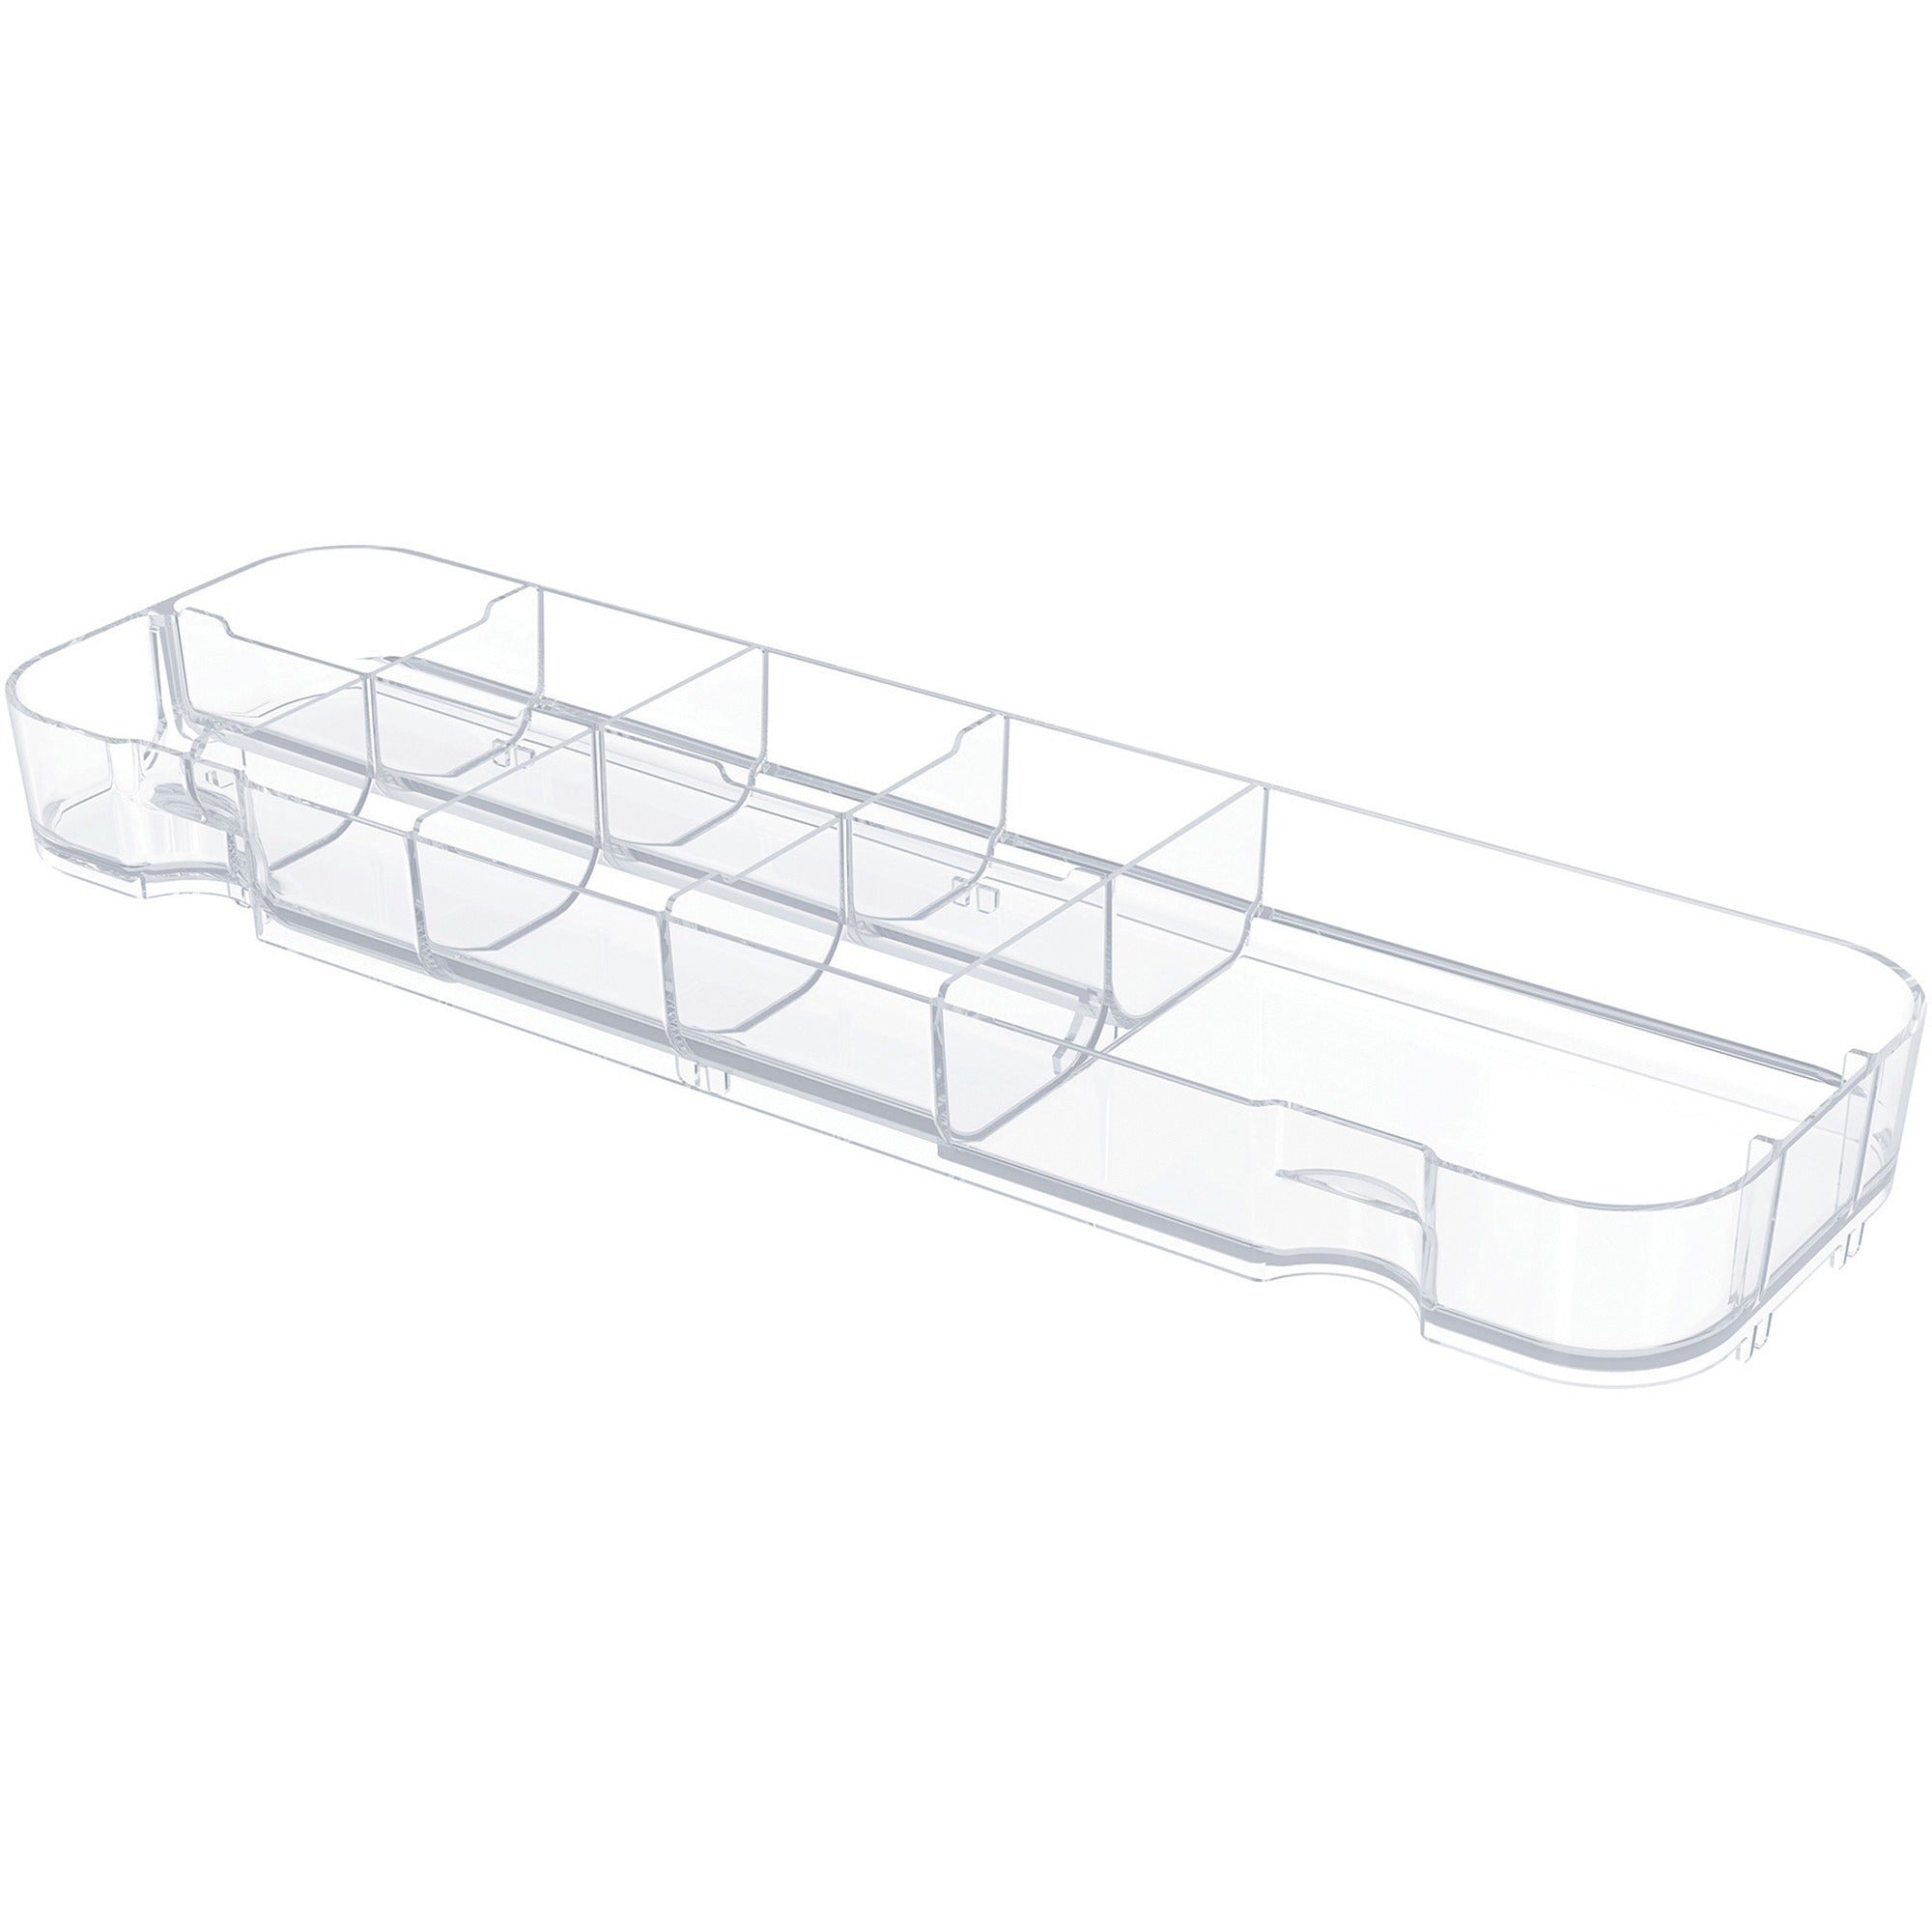 deflecto-caddy-storage-tray-9-compartments-13-height-x-131-width-x-38-depthdesktop-portable-stackable-clear-polystyrene-1-each_def29311cr - 1